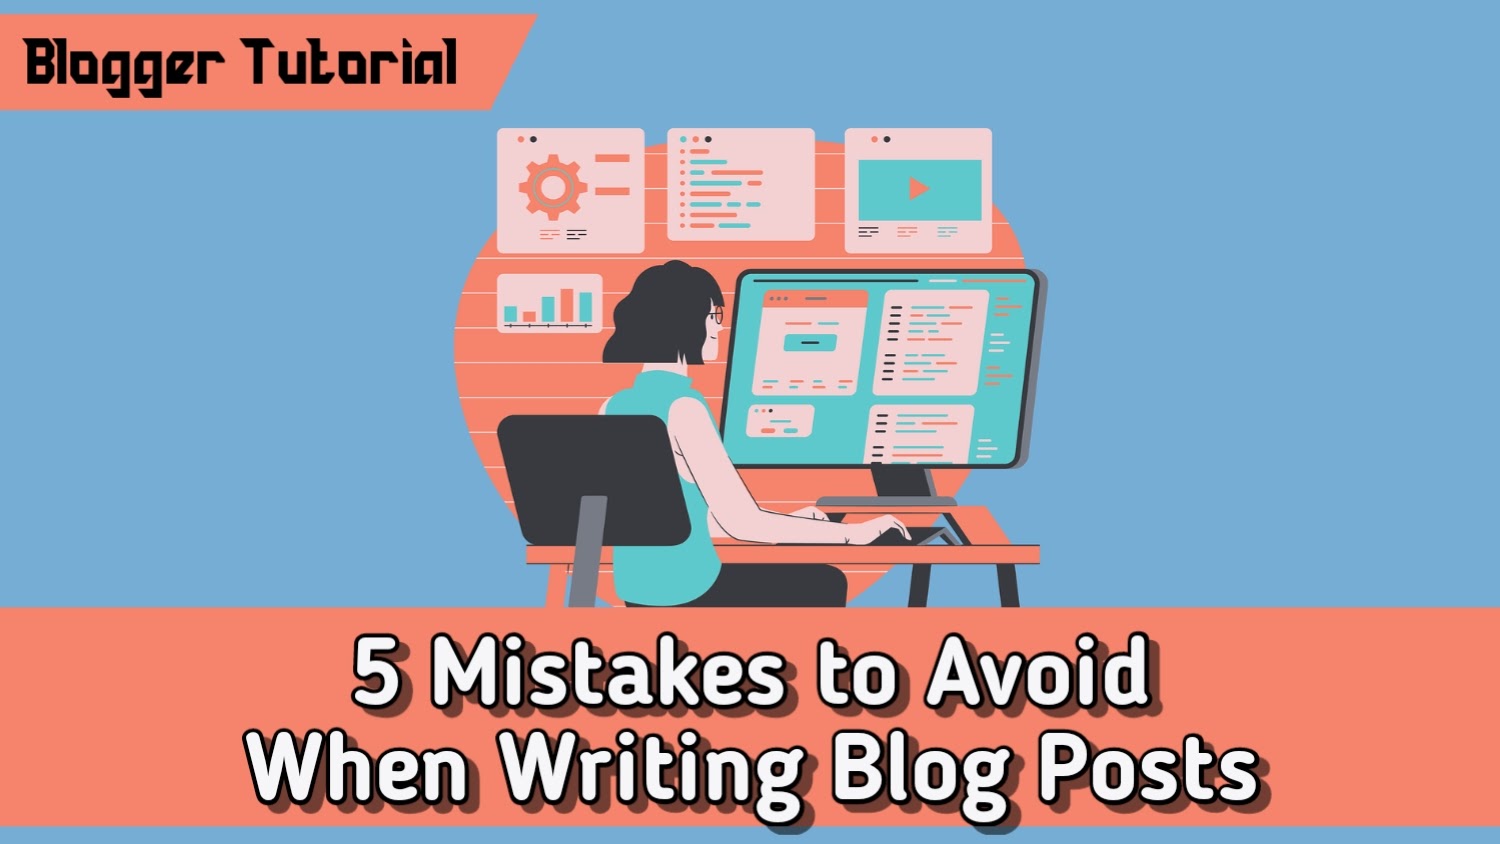 5 Mistakes to Avoid When Writing Blog Posts: A Guide to Writing Better Content